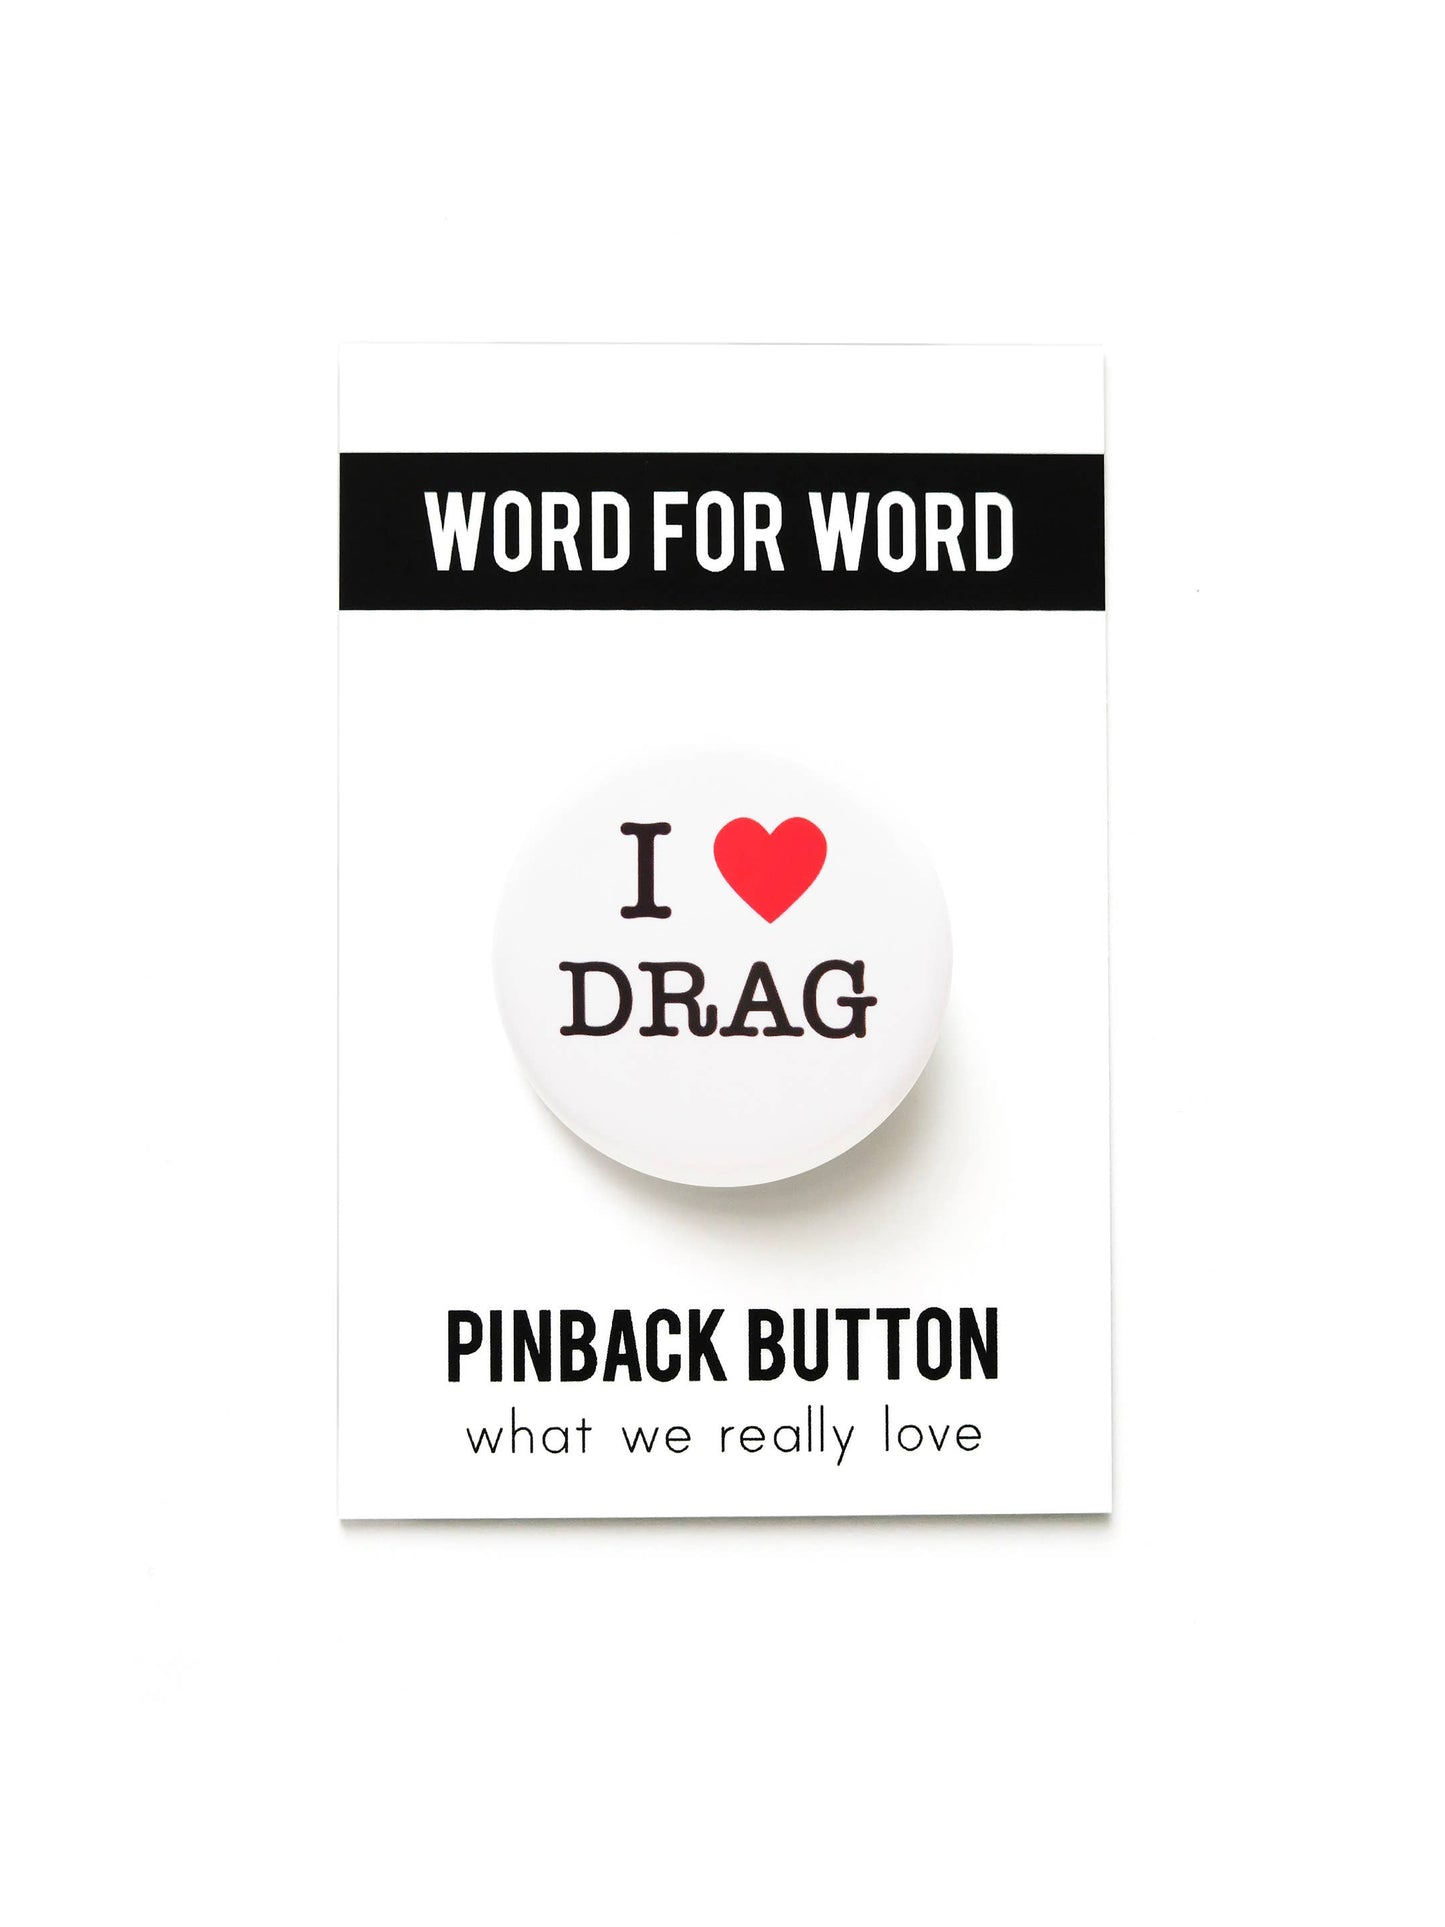 WORD FOR WORD Factory - I LOVE DRAG pinback buttons